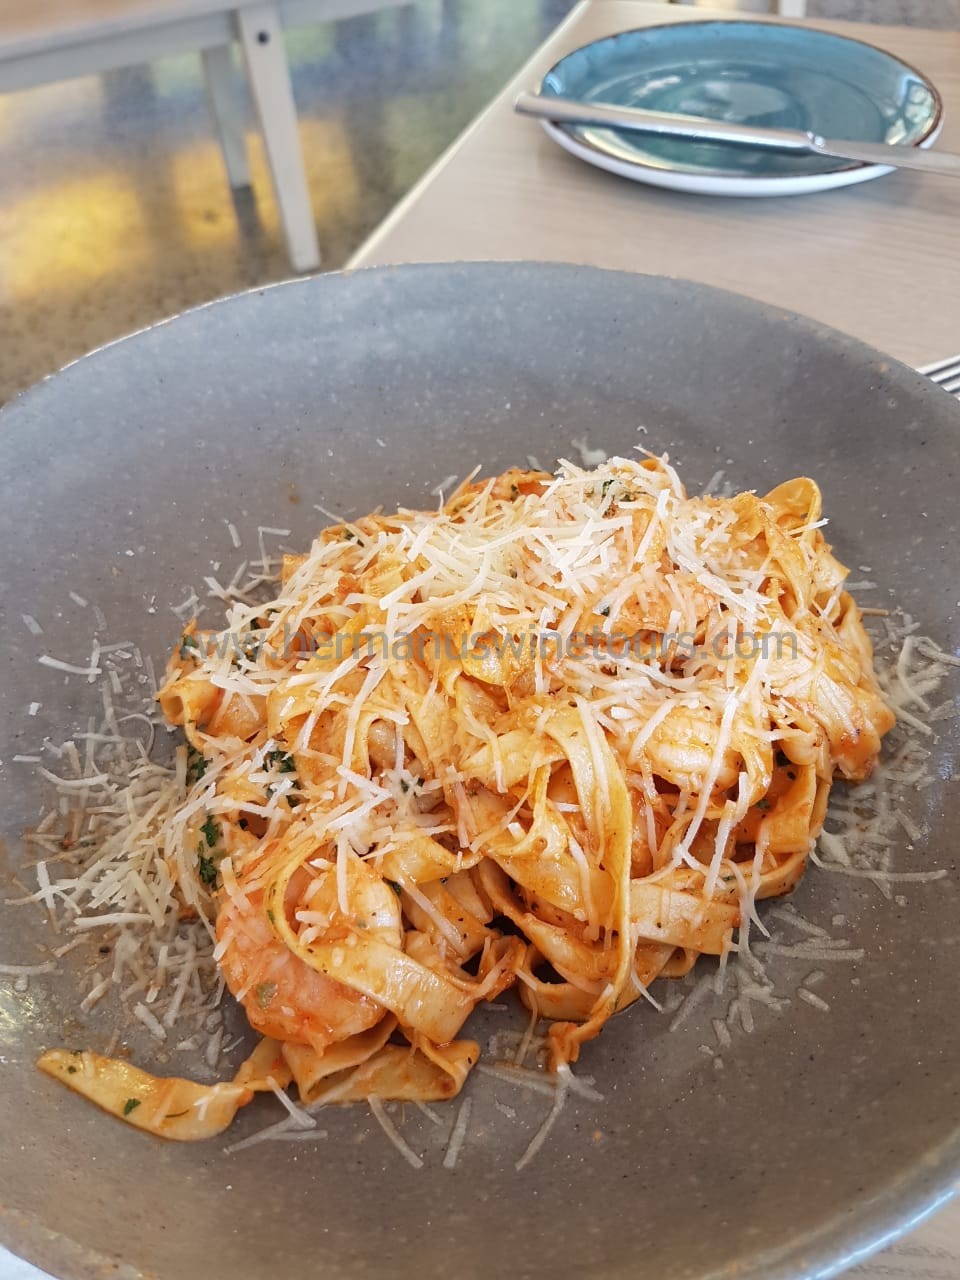 Spicy Prawn tomato linguini, parmesan cheese, Hermanus restaurant, near Cape Town, South Africa